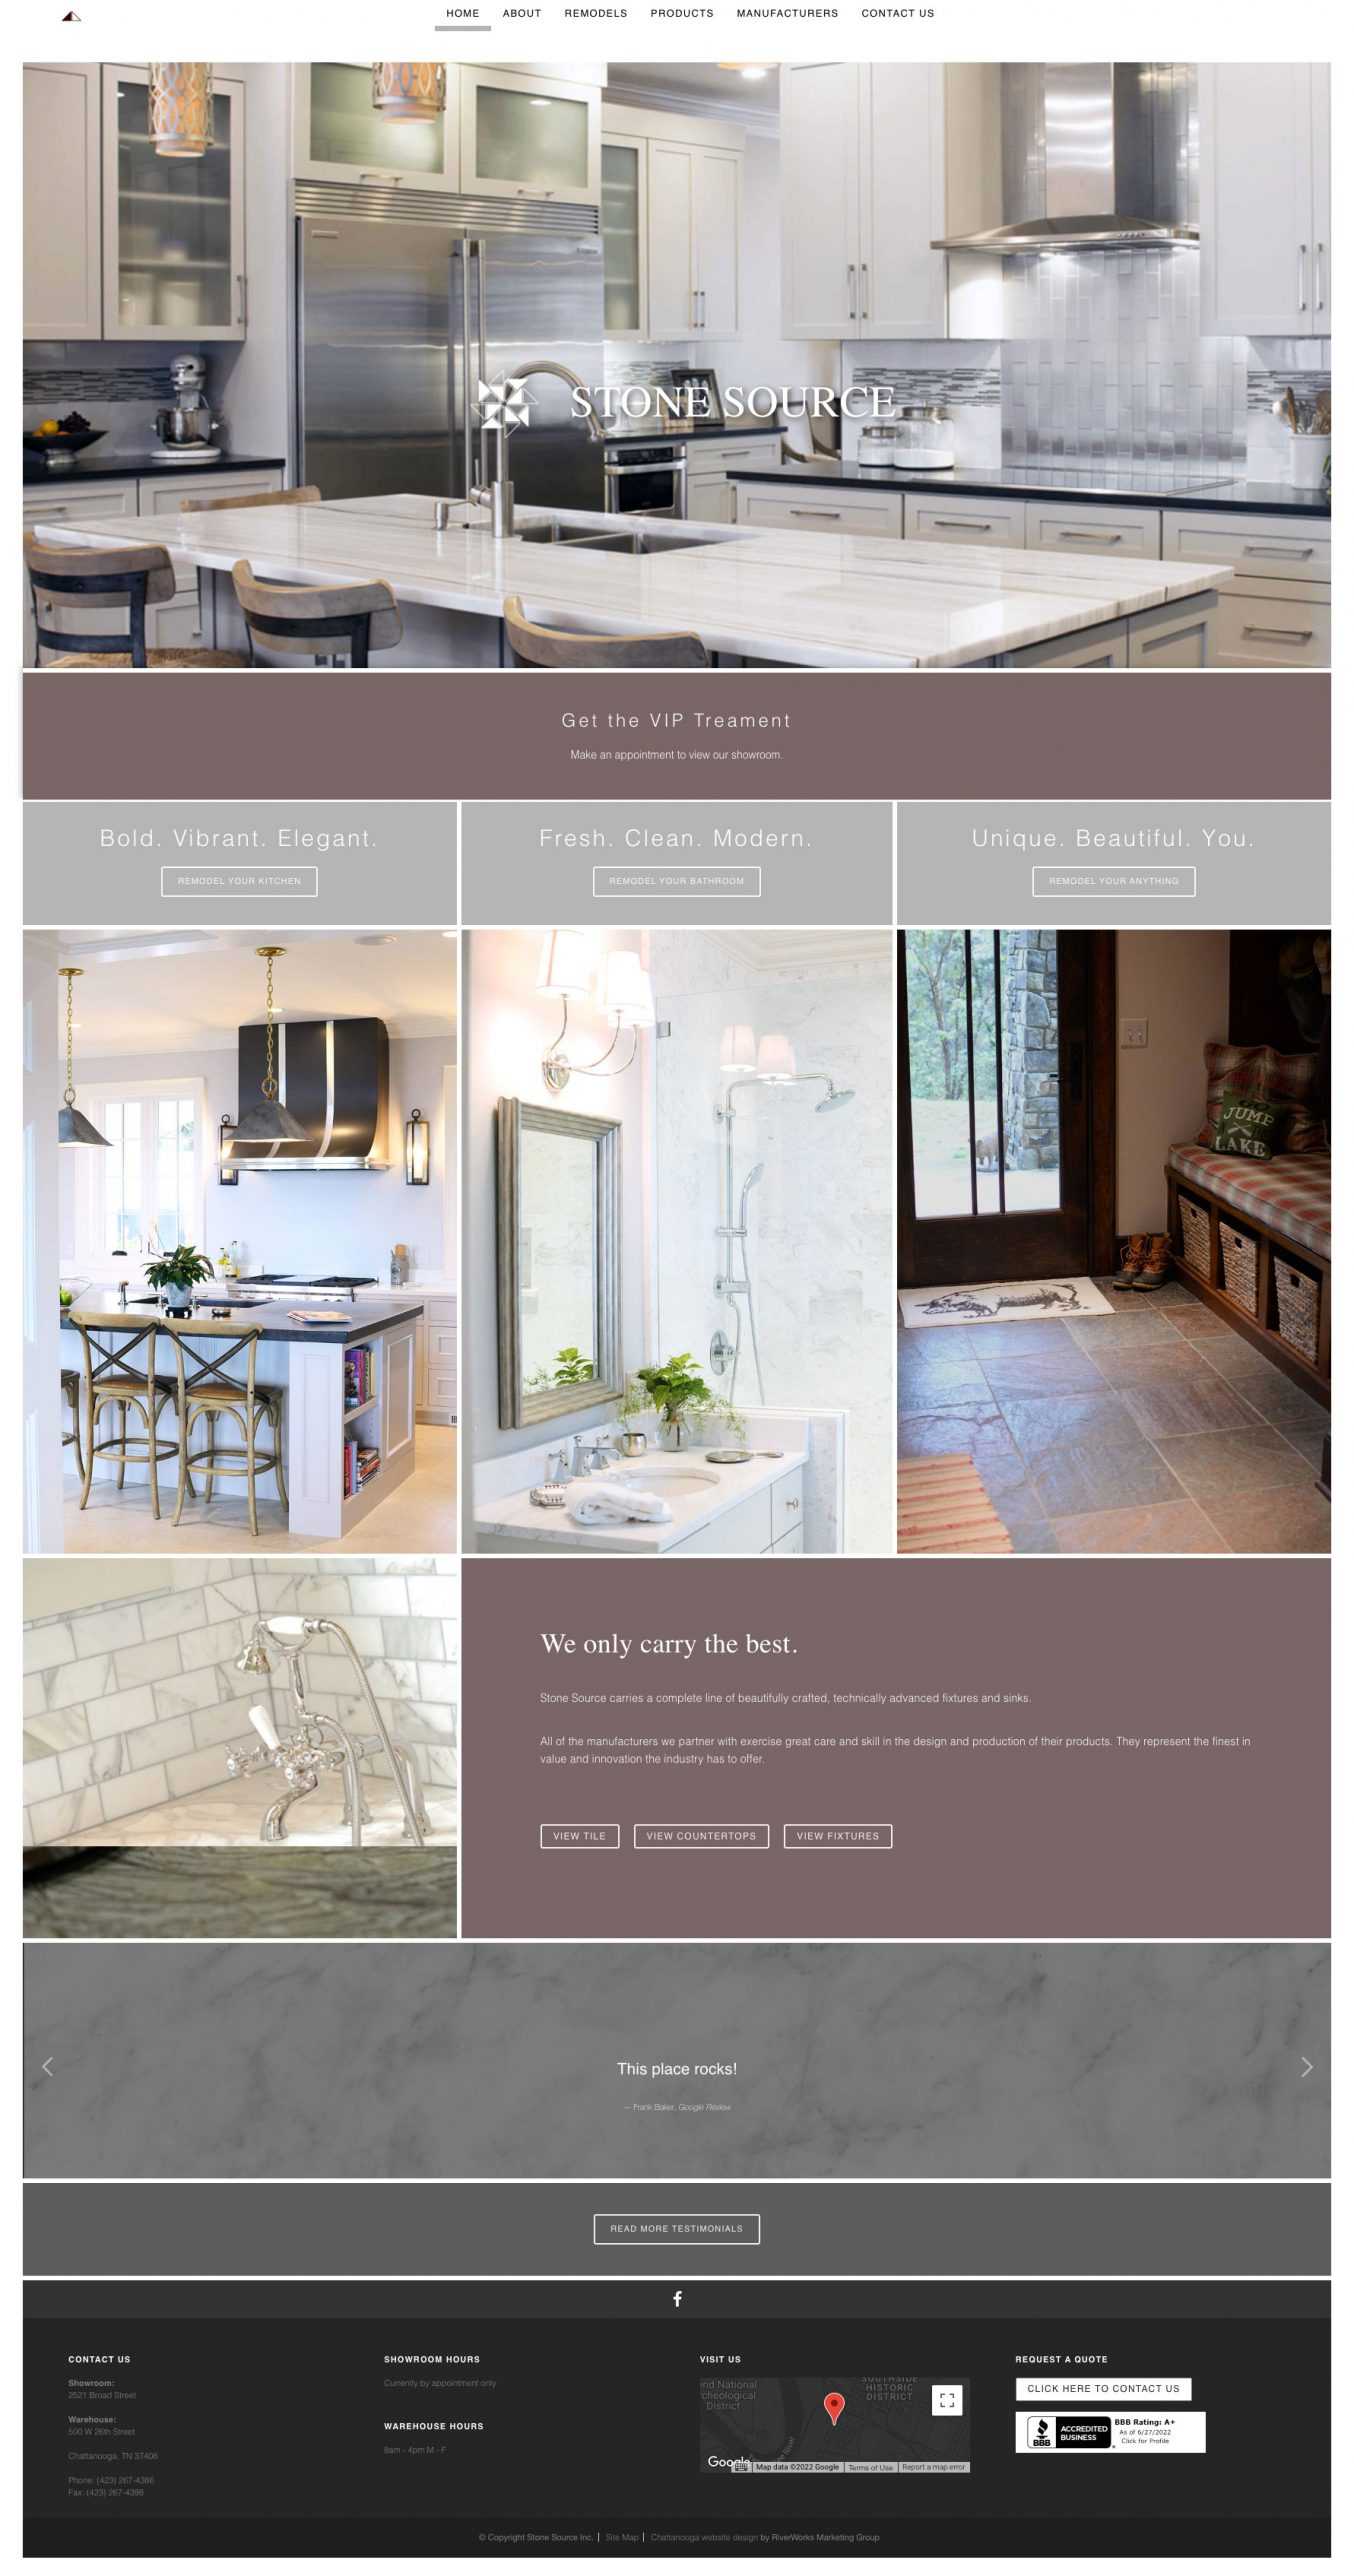 Stone Source Website home page